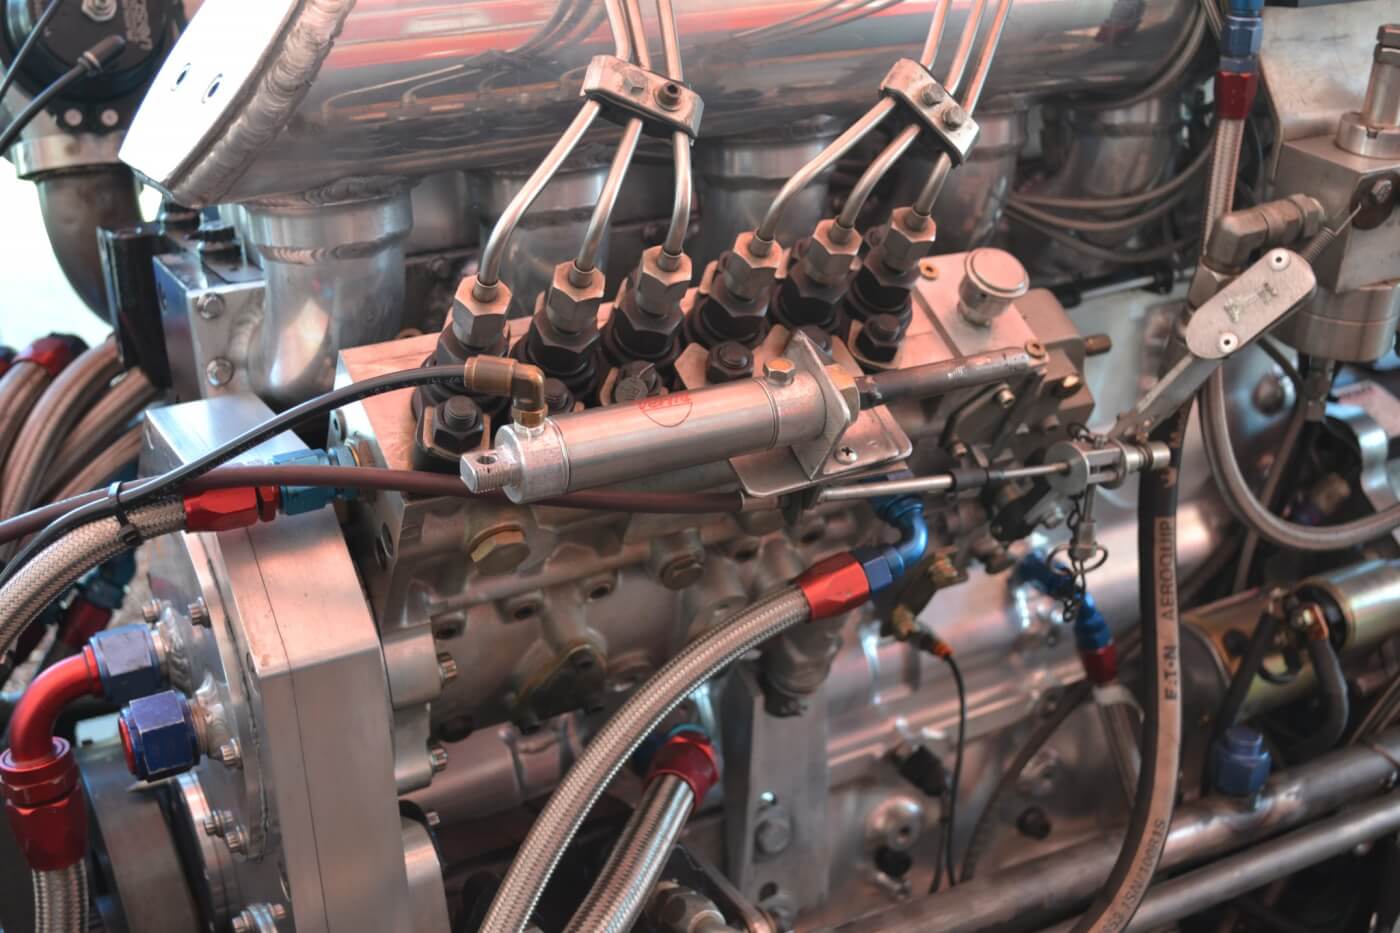 Most p-pump engines are based upon the Bosch P7100 pump, but John's engine uses a highly modified P8600 unit, with 14mm plungers, a custom pump camshaft, and coatings throughout the unit. Built by Scheid Diesel, the injection pump is capable of more than 1,000 cc of fuel flow.